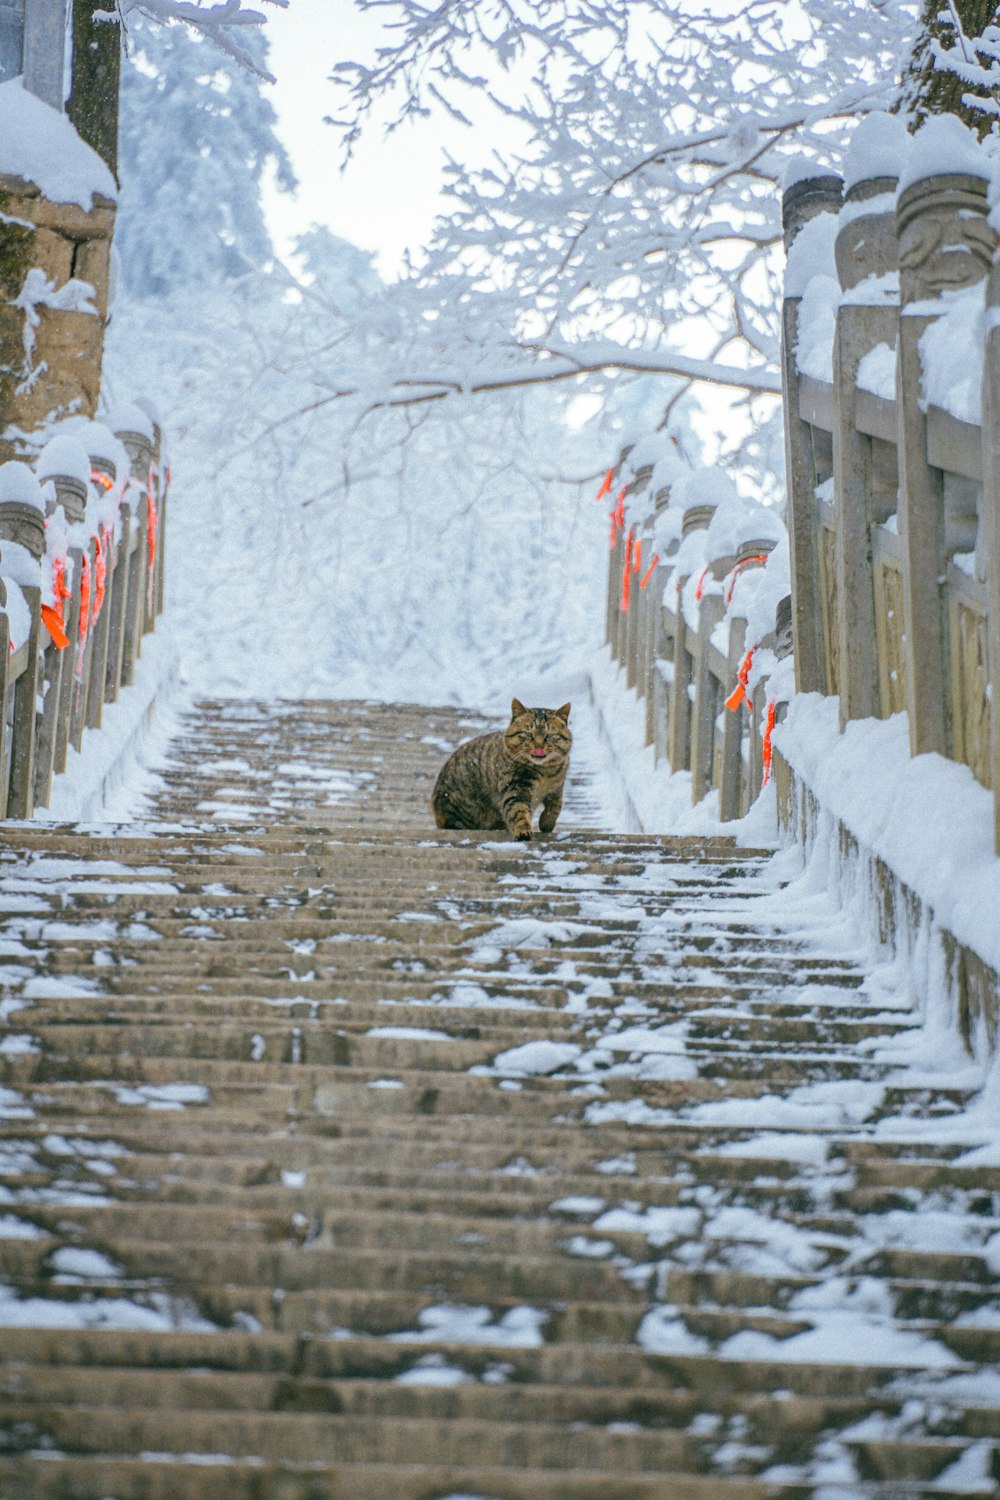 a cat is sitting on the steps in the snow